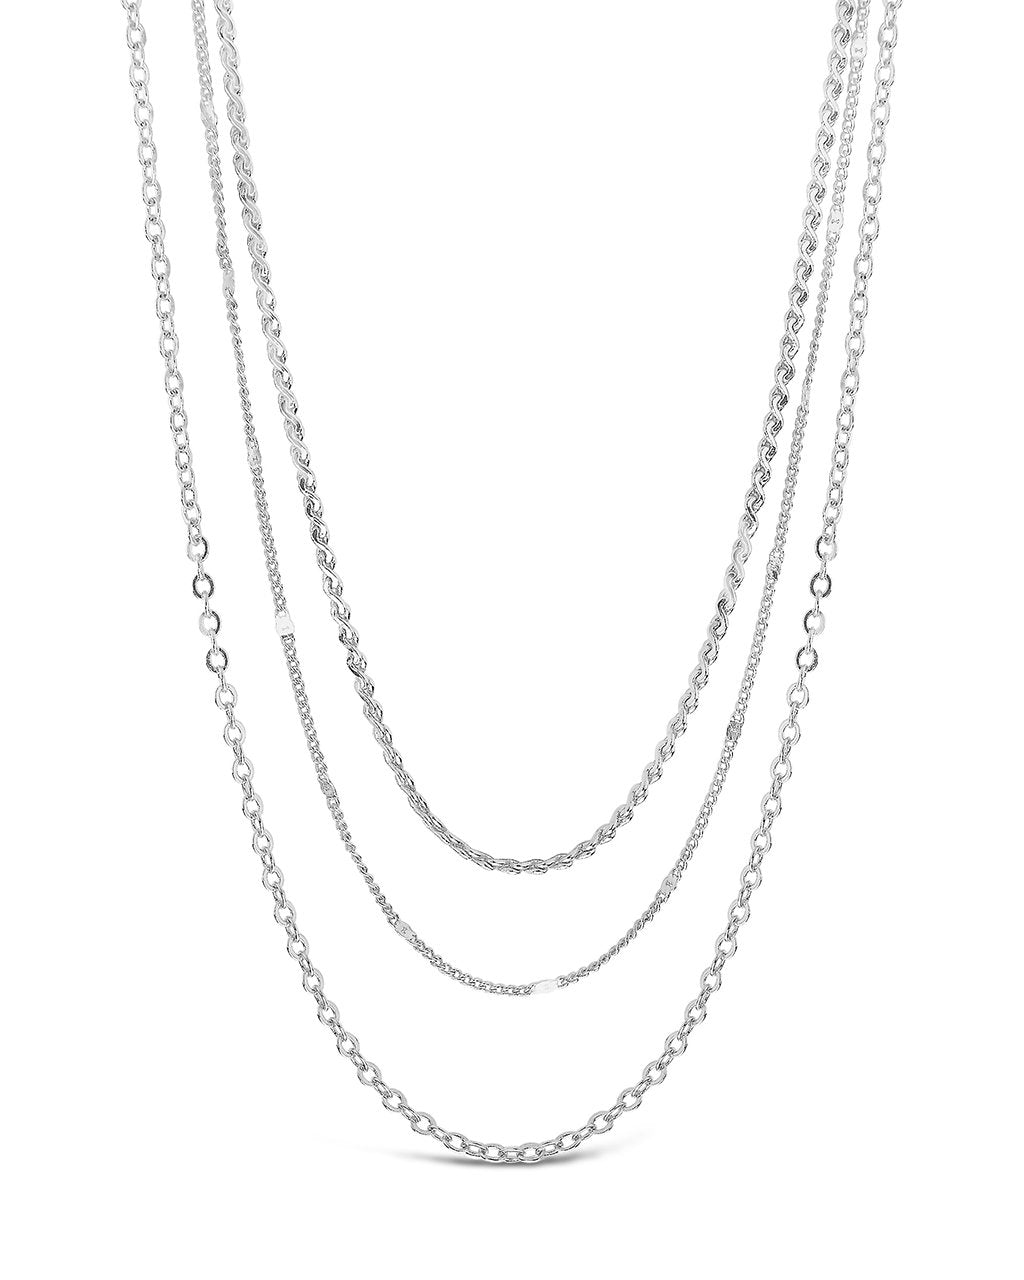 Dainty Three Layer Chain Necklace Necklace Sterling Forever Silver 